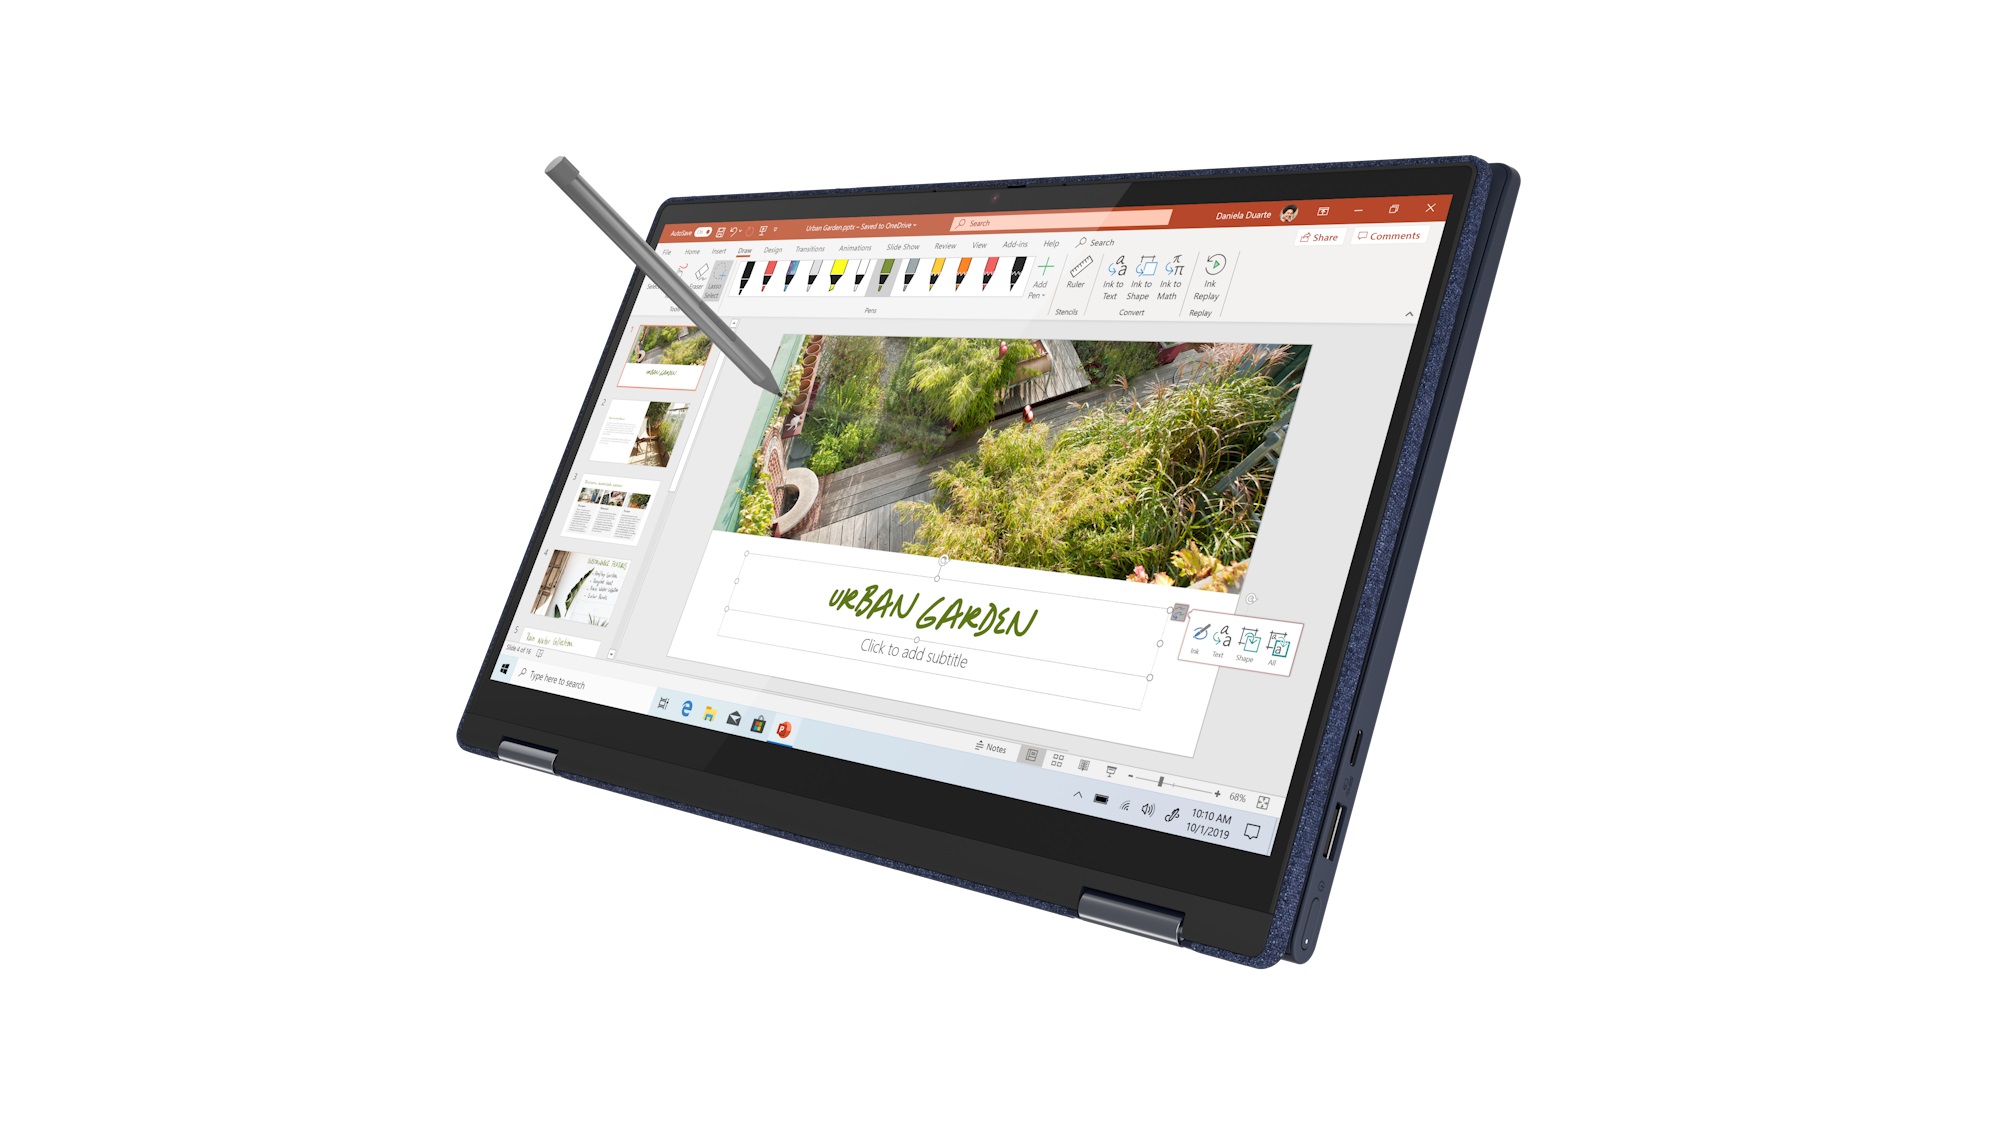 Lenovo Yoga 6 shown with pen hovering over screen editing an image